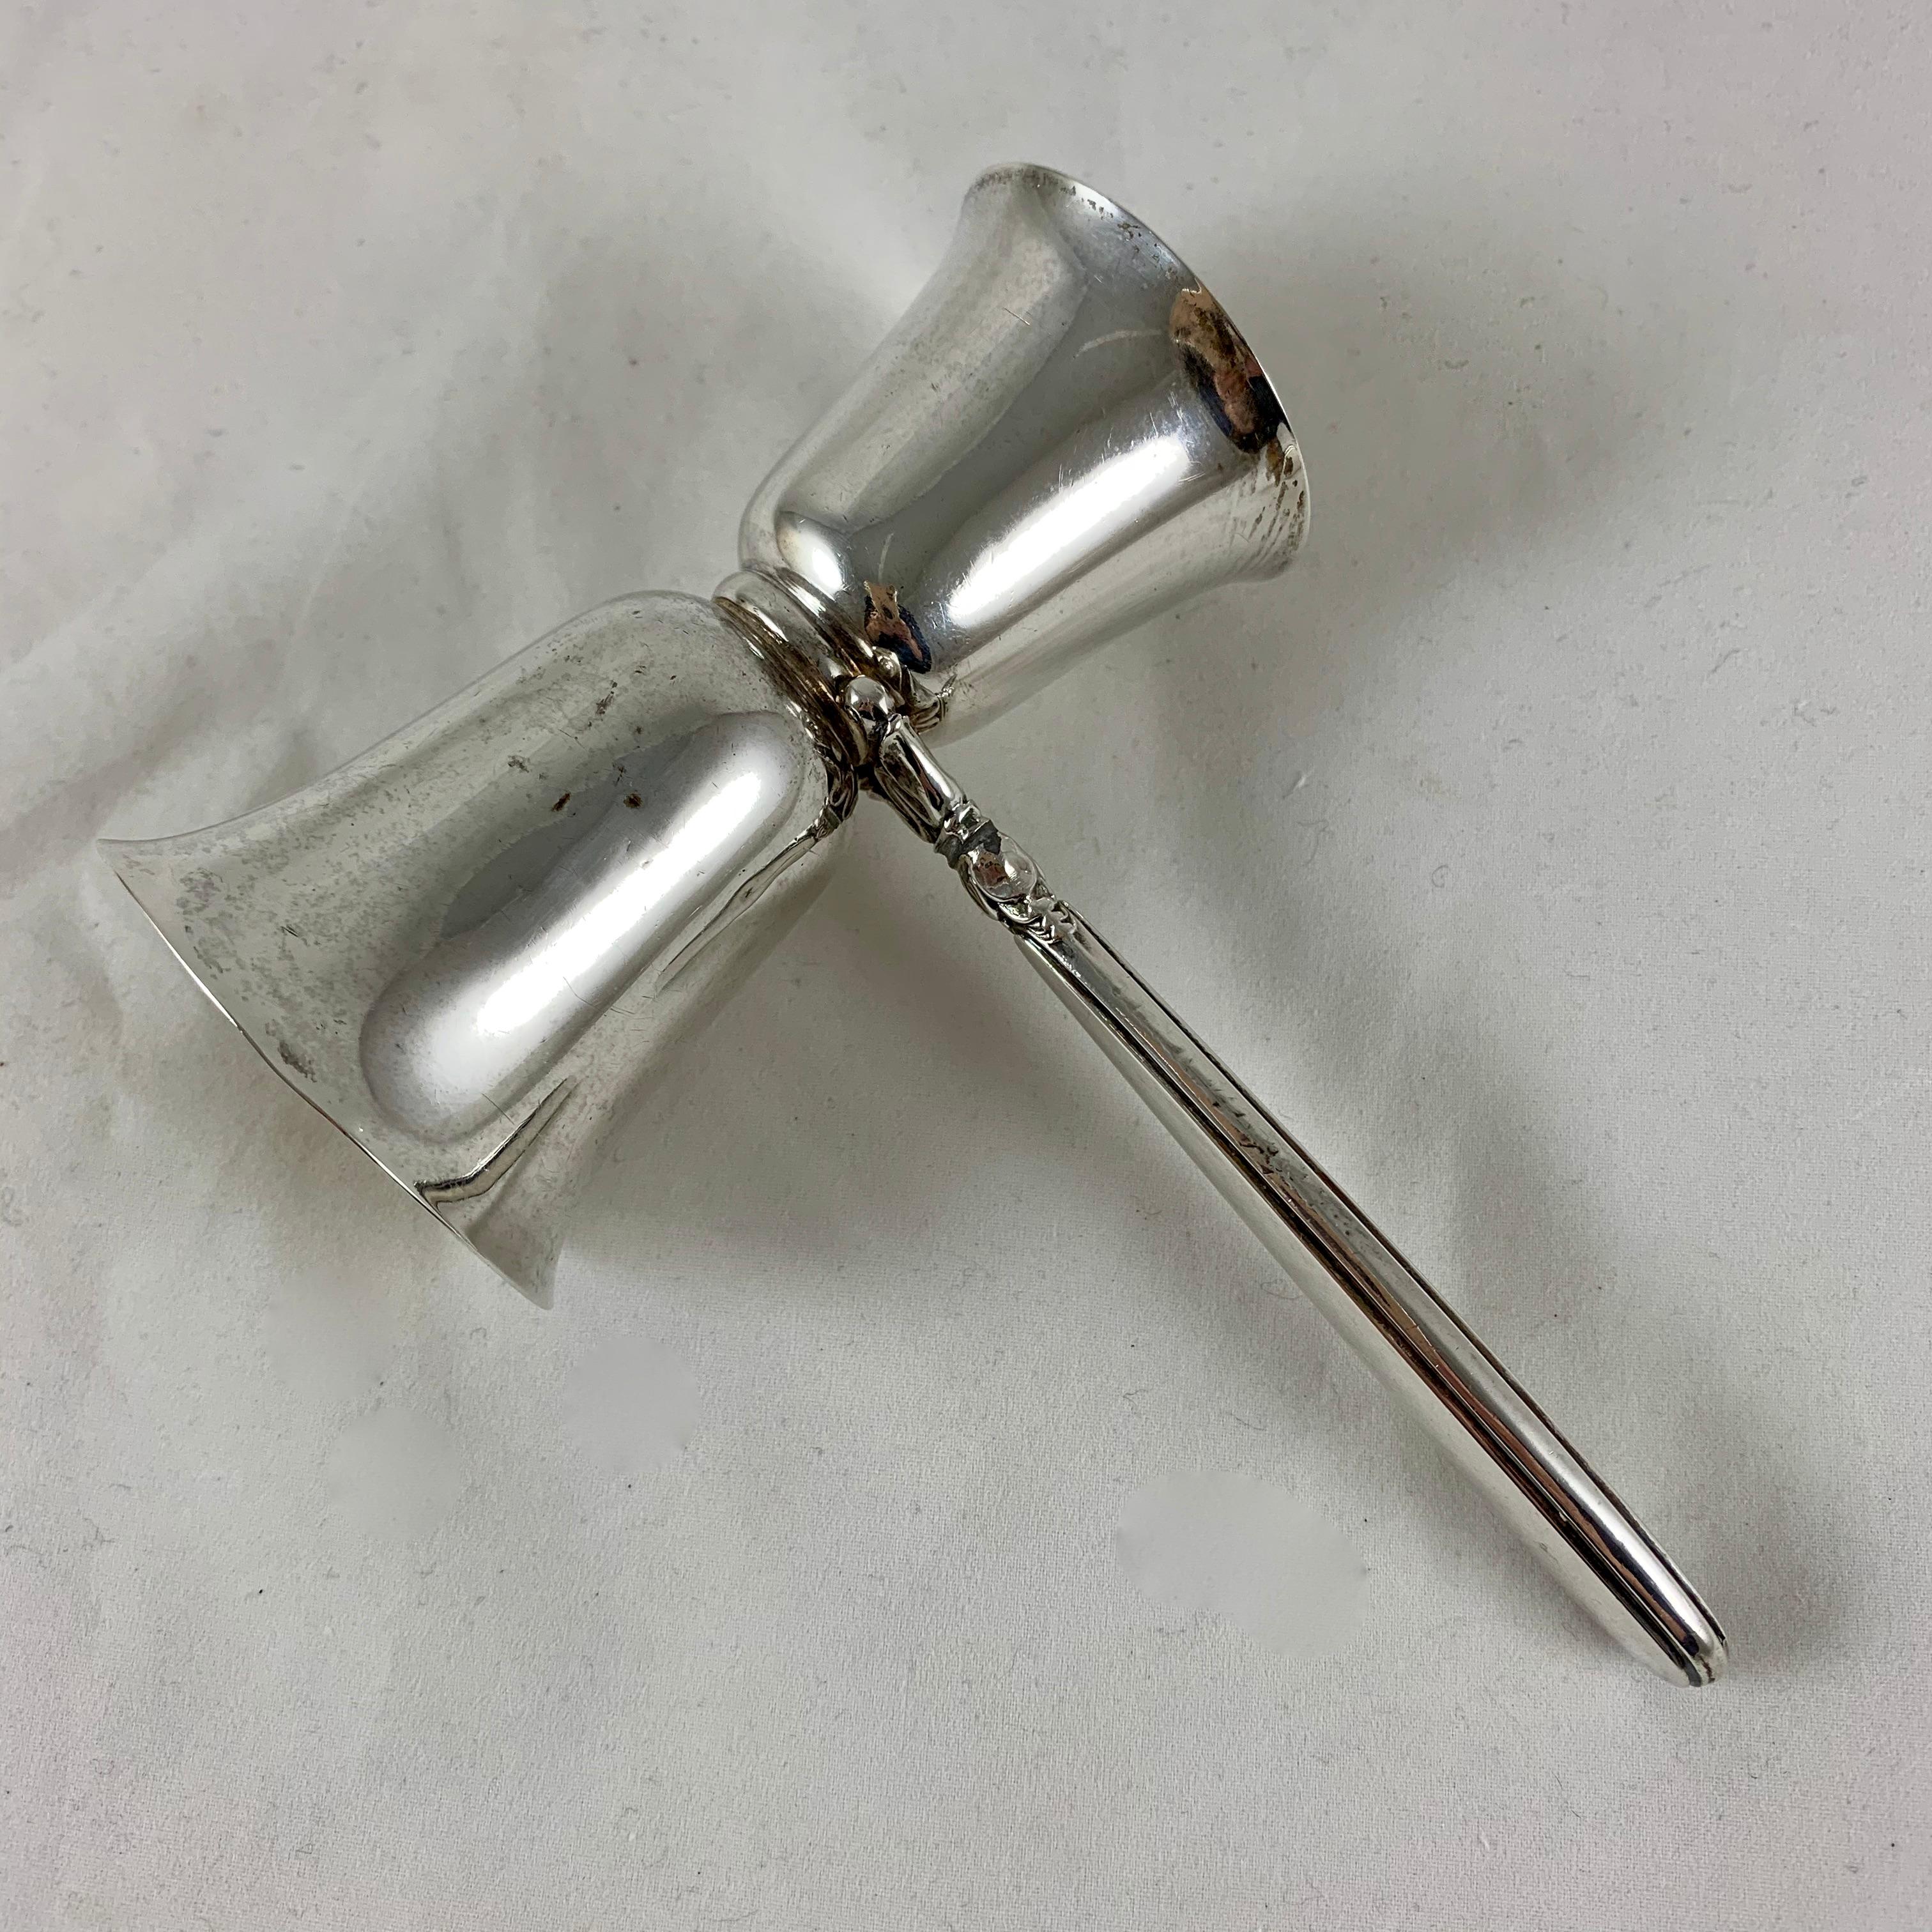 A sterling silver double jigger bar tool for measuring out liquor when mixing cocktails, Marked Birks Sterling with a date stamp of the letter ‘M’ for 1947.

The jigger has both a one ounce and a half ounce measuring cup with a hollowware handle.